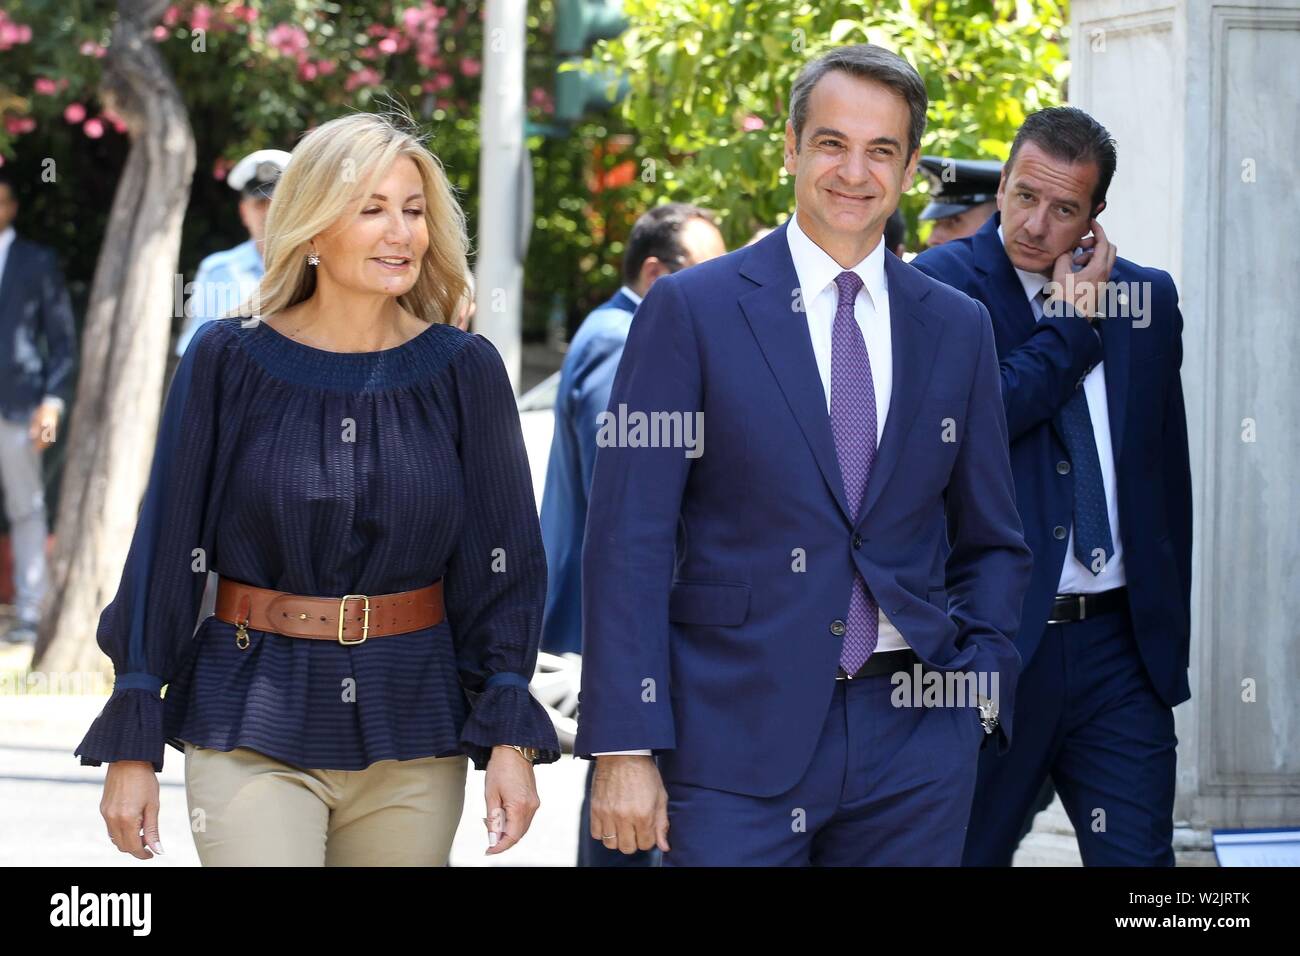 Athens, Greece. 9th July, 2019. Greek Prime Minister KYRIAKOS MITSOTAKIS  with his wife MAREVA arrive at Presidential Palace for the swearing  ceremony of the new cabinet. (Credit Image: © Aristidis VafeiadakisZUMA Wire